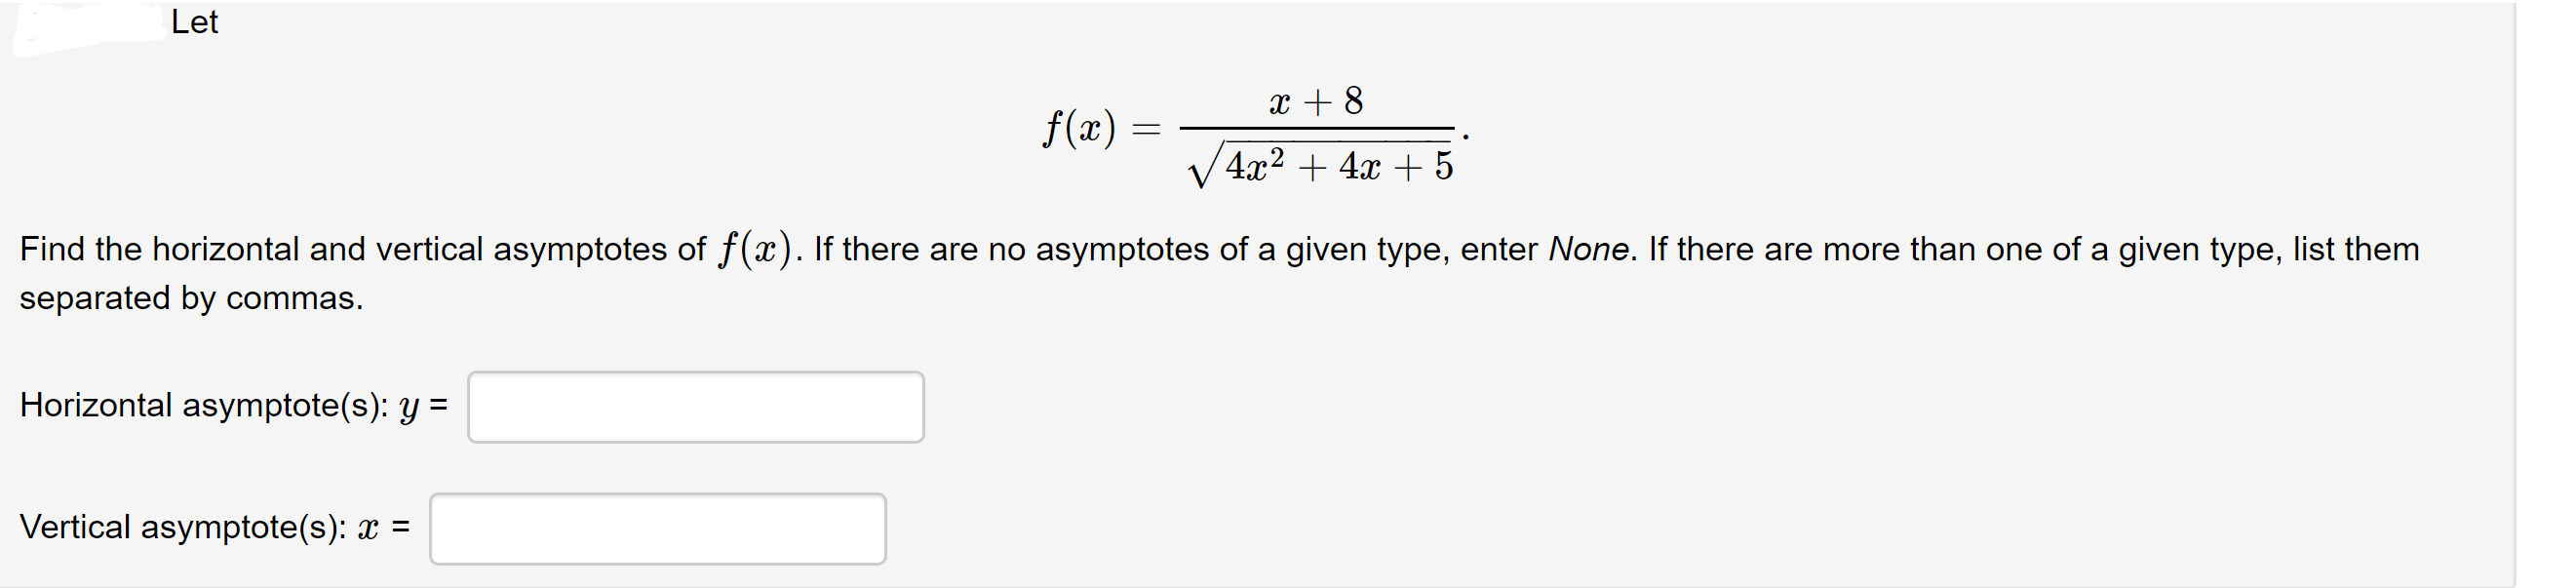 Let
x + 8
f(x)
4x² + 4x + 5
Find the horizontal and vertical asymptotes of f(x). If there are no asymptotes of a given type, enter None. If there are more than one of a given type, list them
separated by commas.
Horizontal asymptote(s): y =
Vertical asymptote(s): x =
